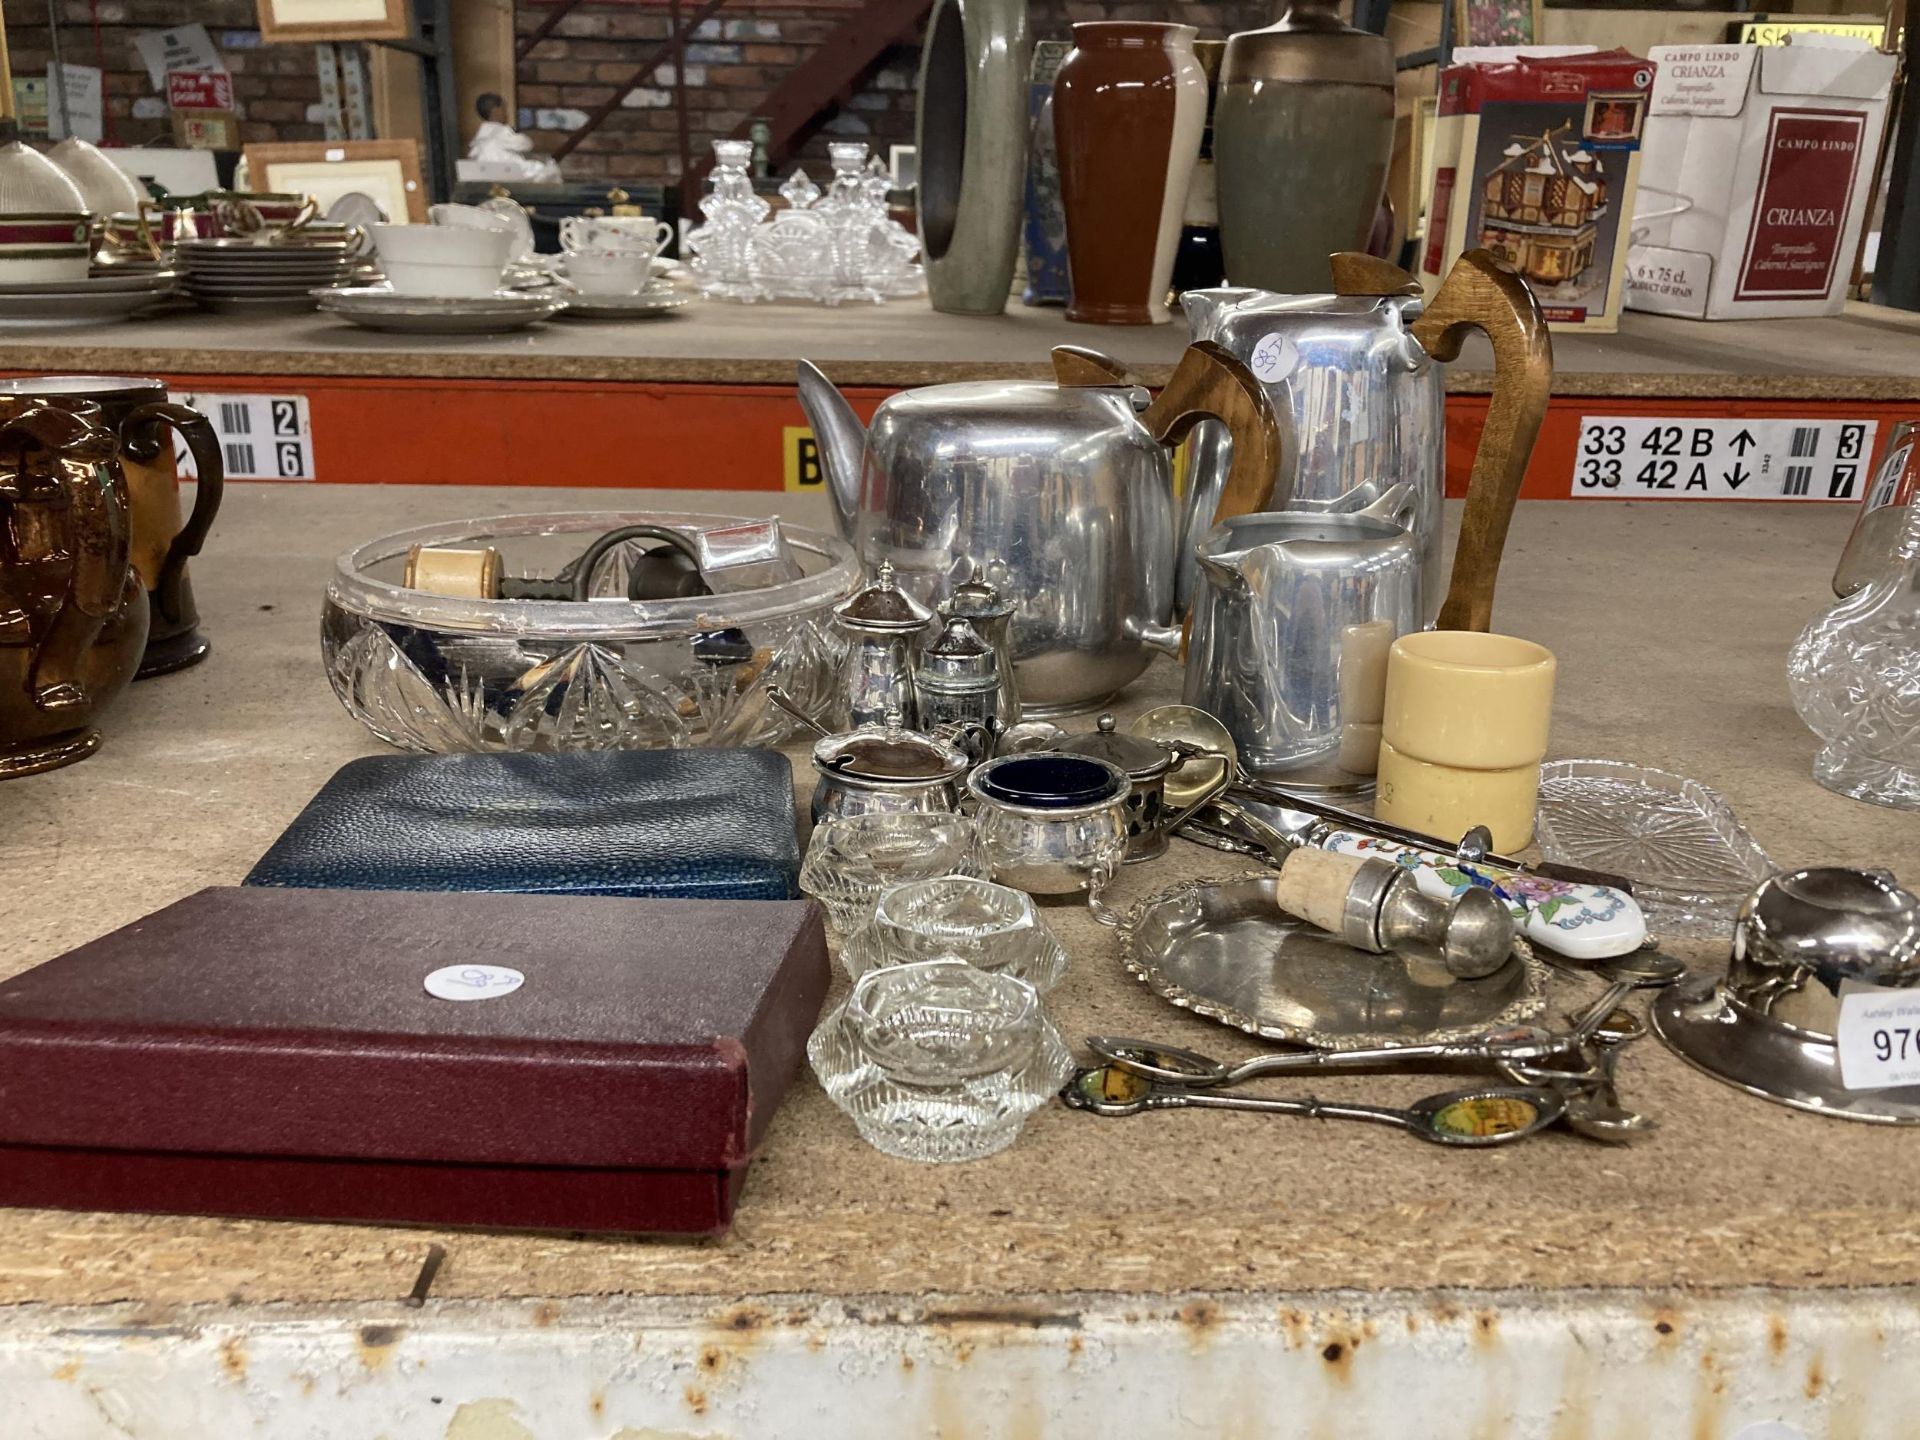 A MIXED VINTAGE LOT TO INCLUDE A PICQUOT WARE TEASET, NAPKIN RINGS, FLATWARE, SILVER PLATED